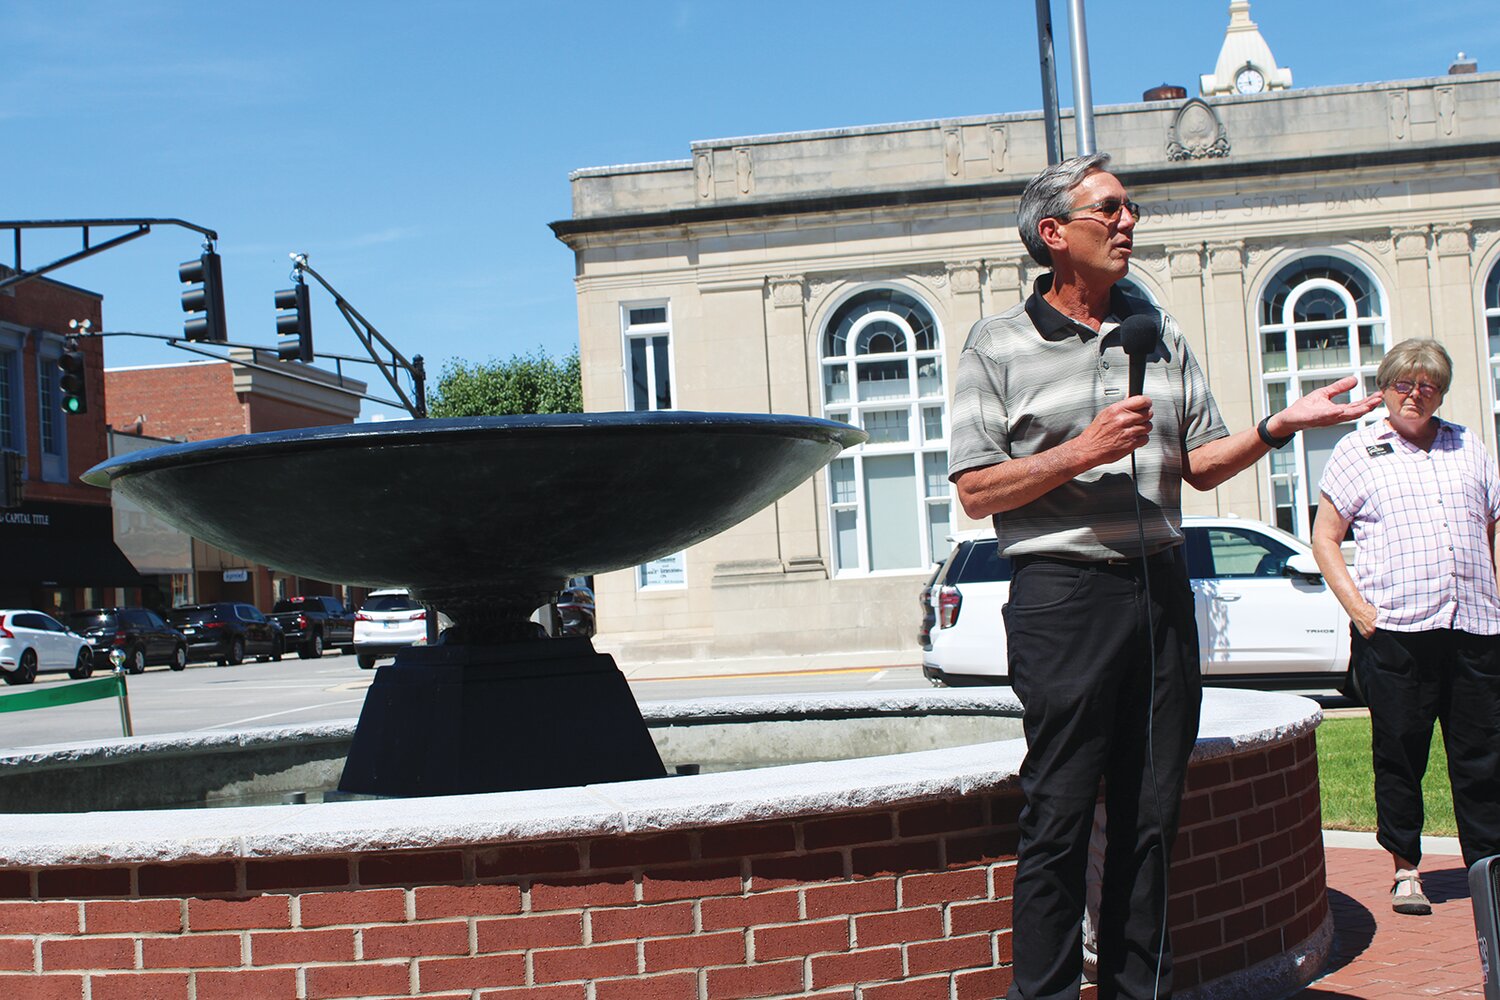 Tom Fansler, president of Tiii Environments/Smock Fansler Corp., talks about the new fountain his company helped create at Marie Canine Plaza. Also pictured is Sue Lucas, director of Crawfordsville Main Street.